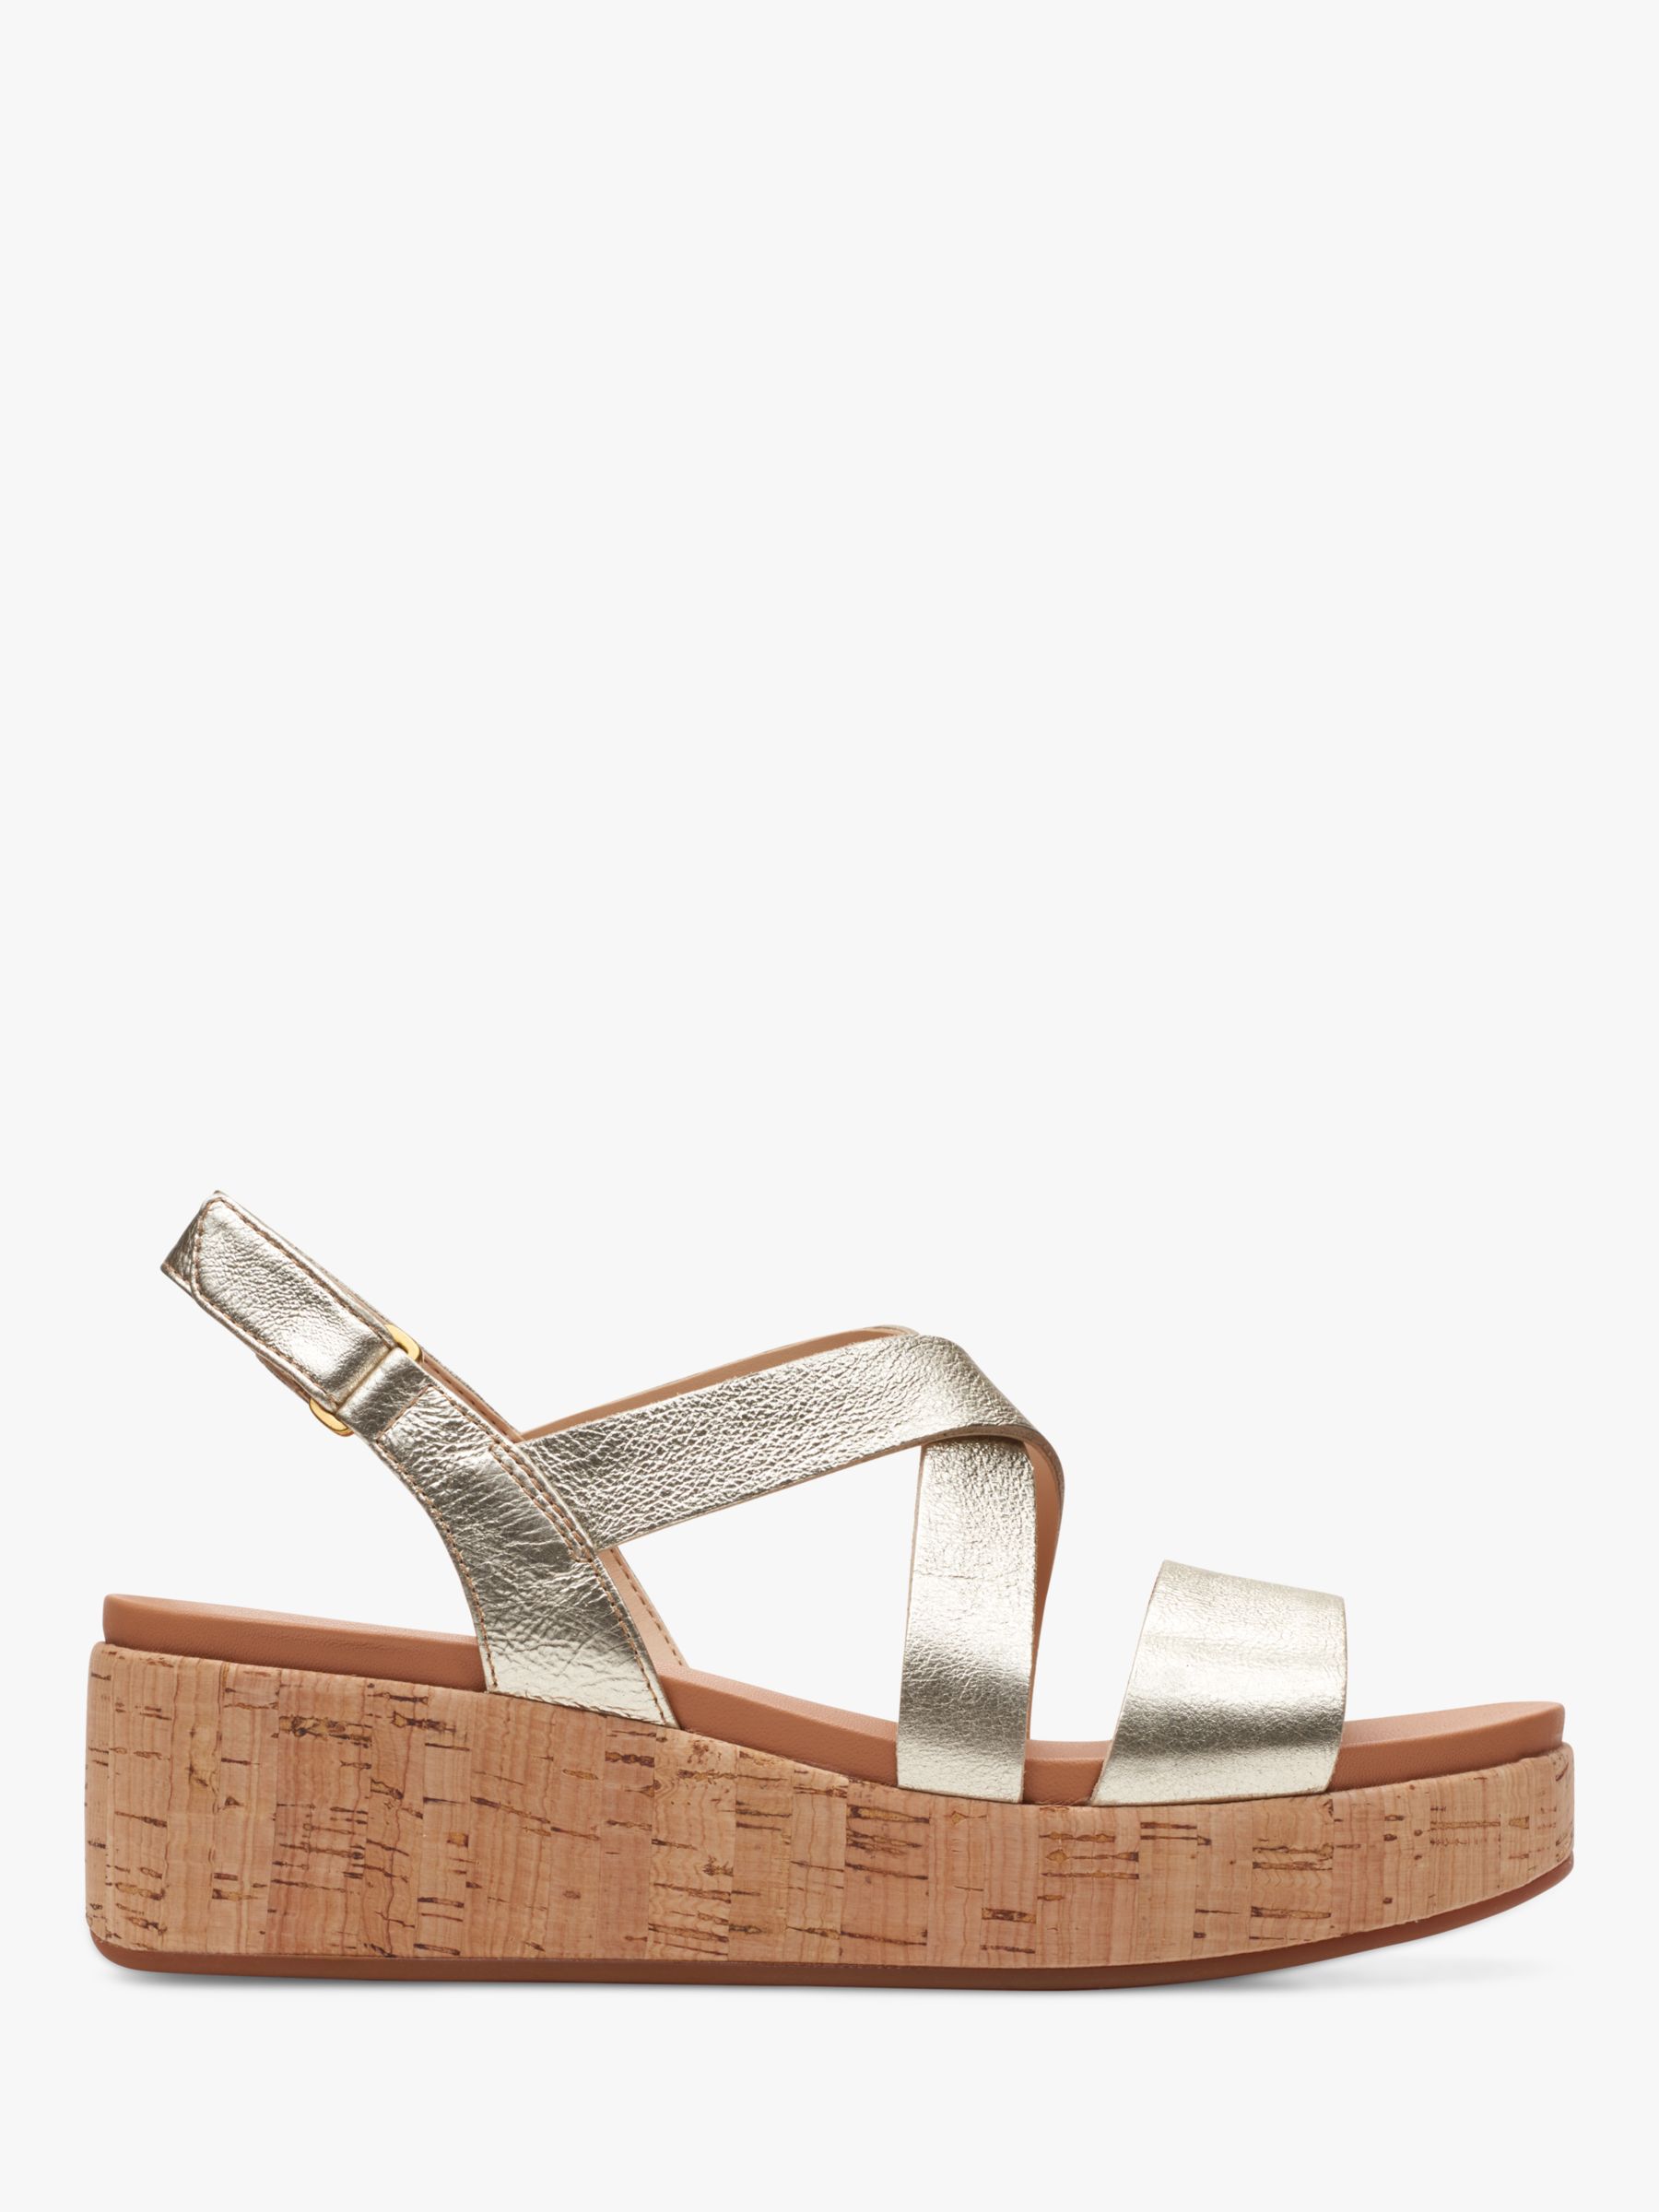 Clarks Kimmei Cork Wide Fit Leather Wedge Sandals, Champagne at John ...